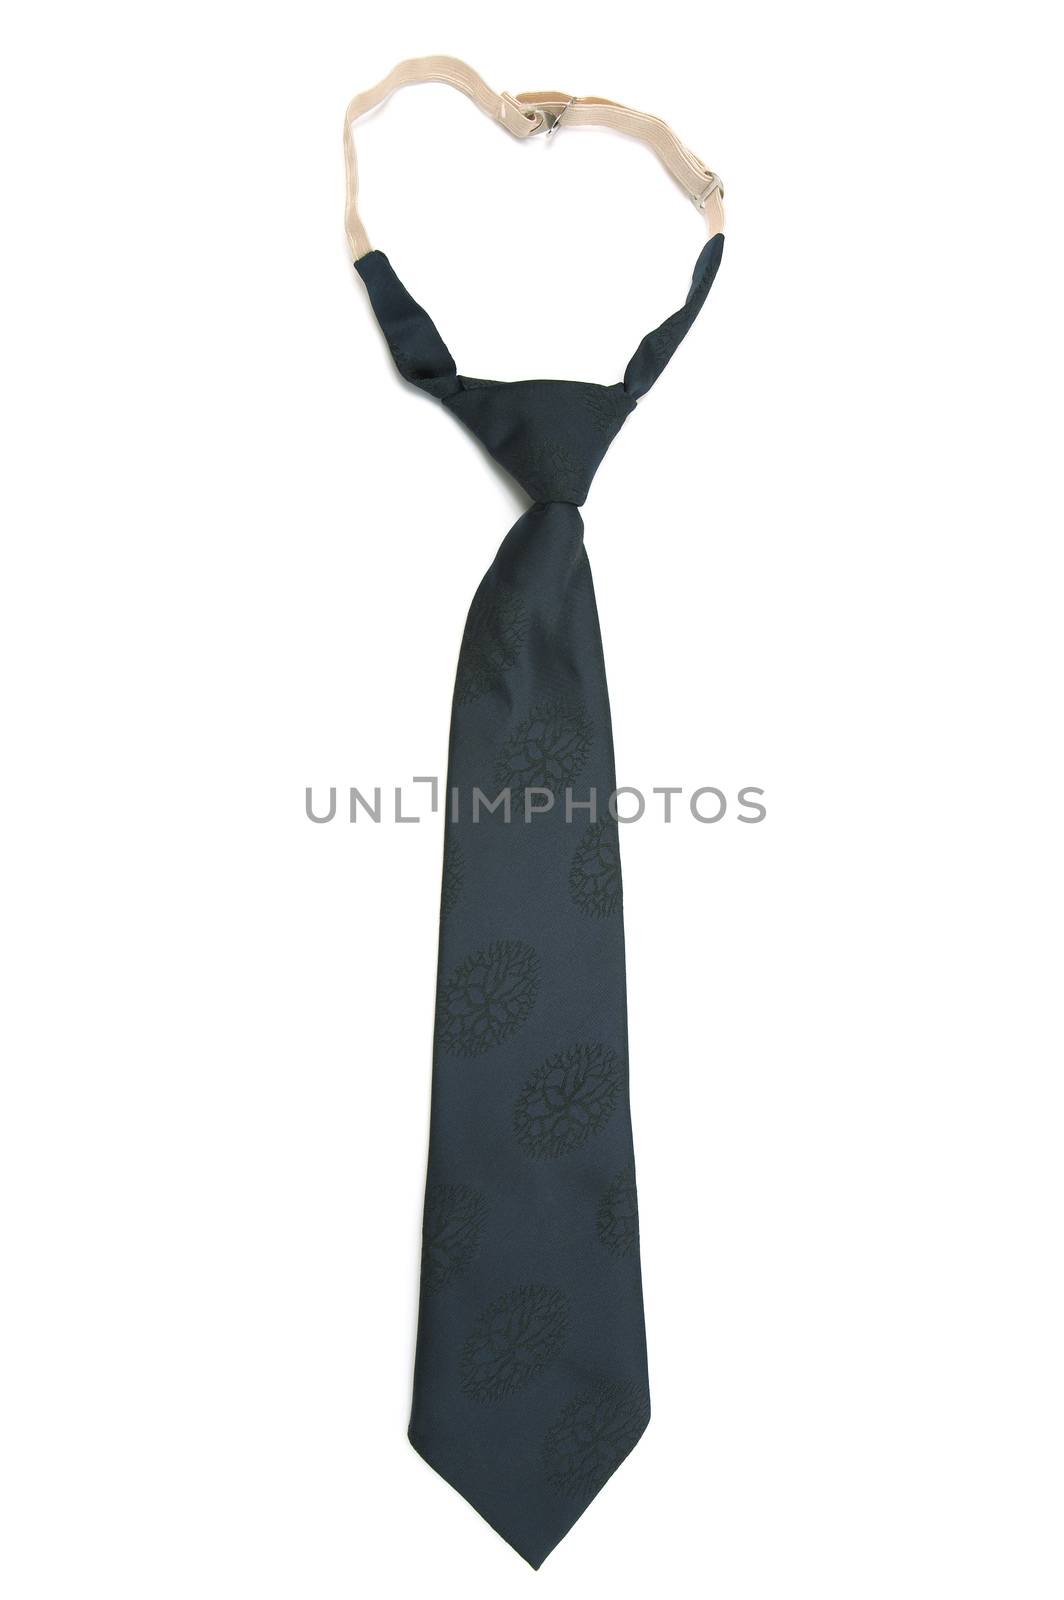 Tie with an elastic band on a white background